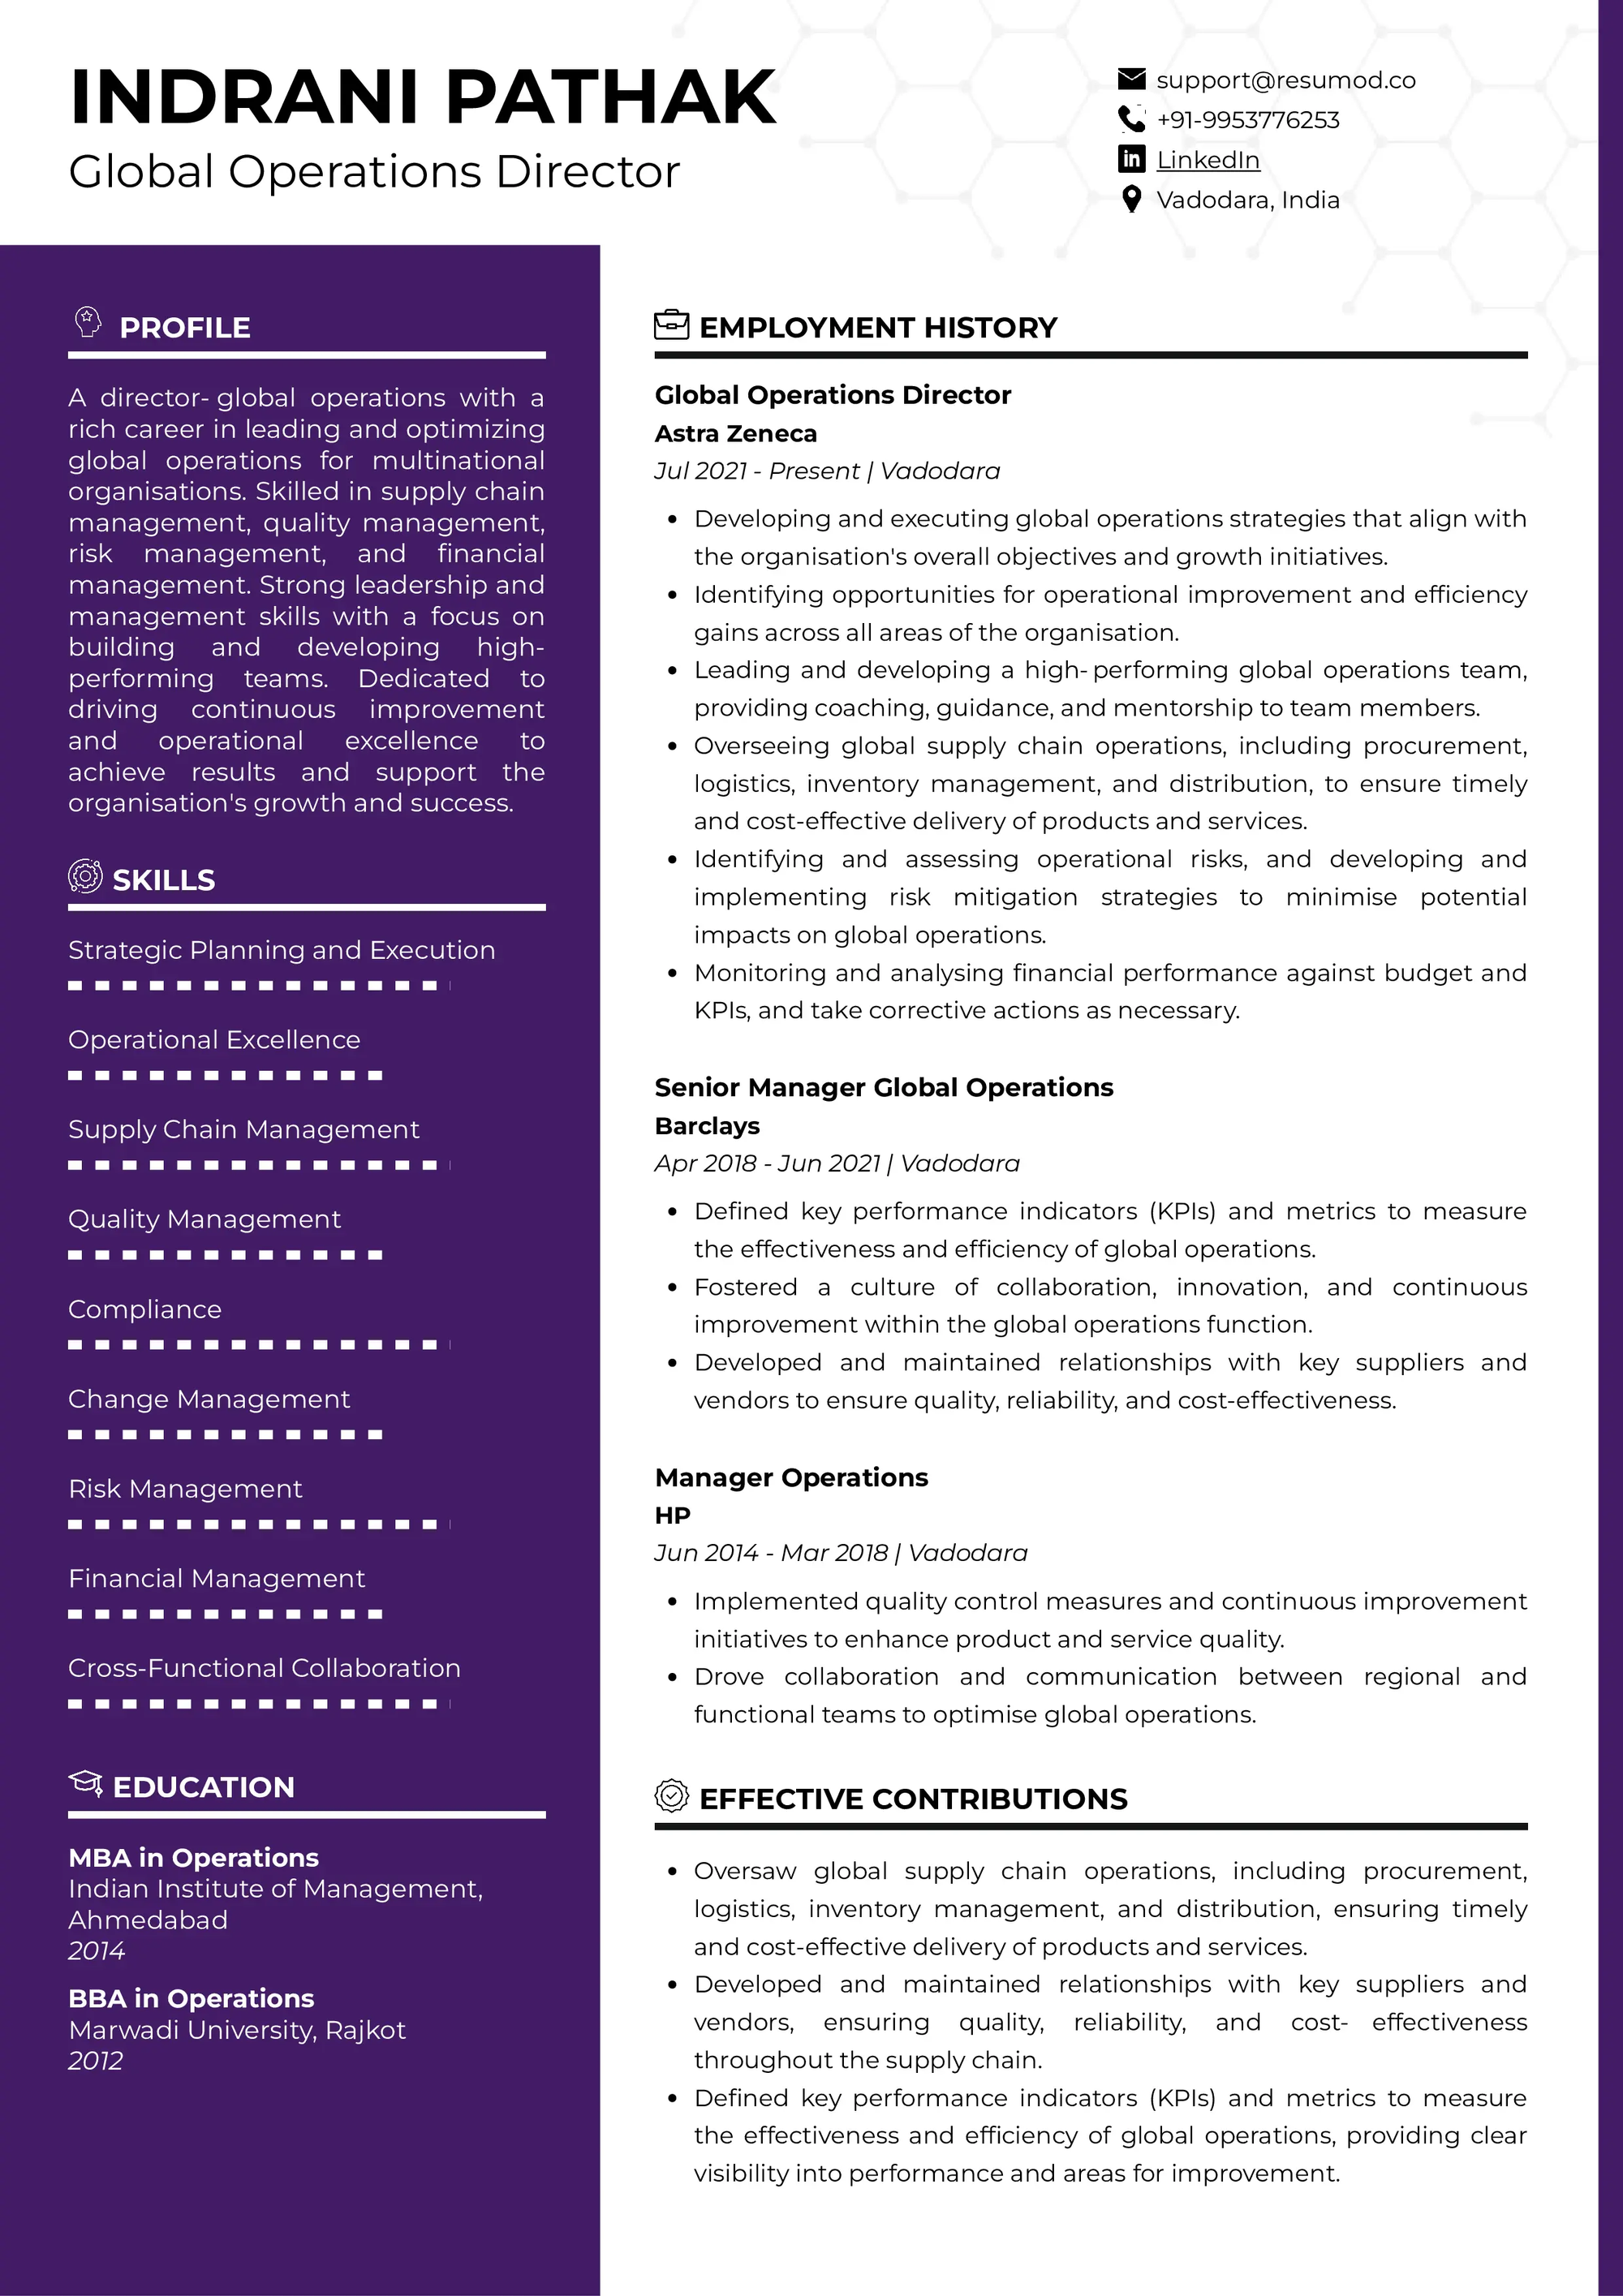 Resume of Global Operations Director built on Resumod